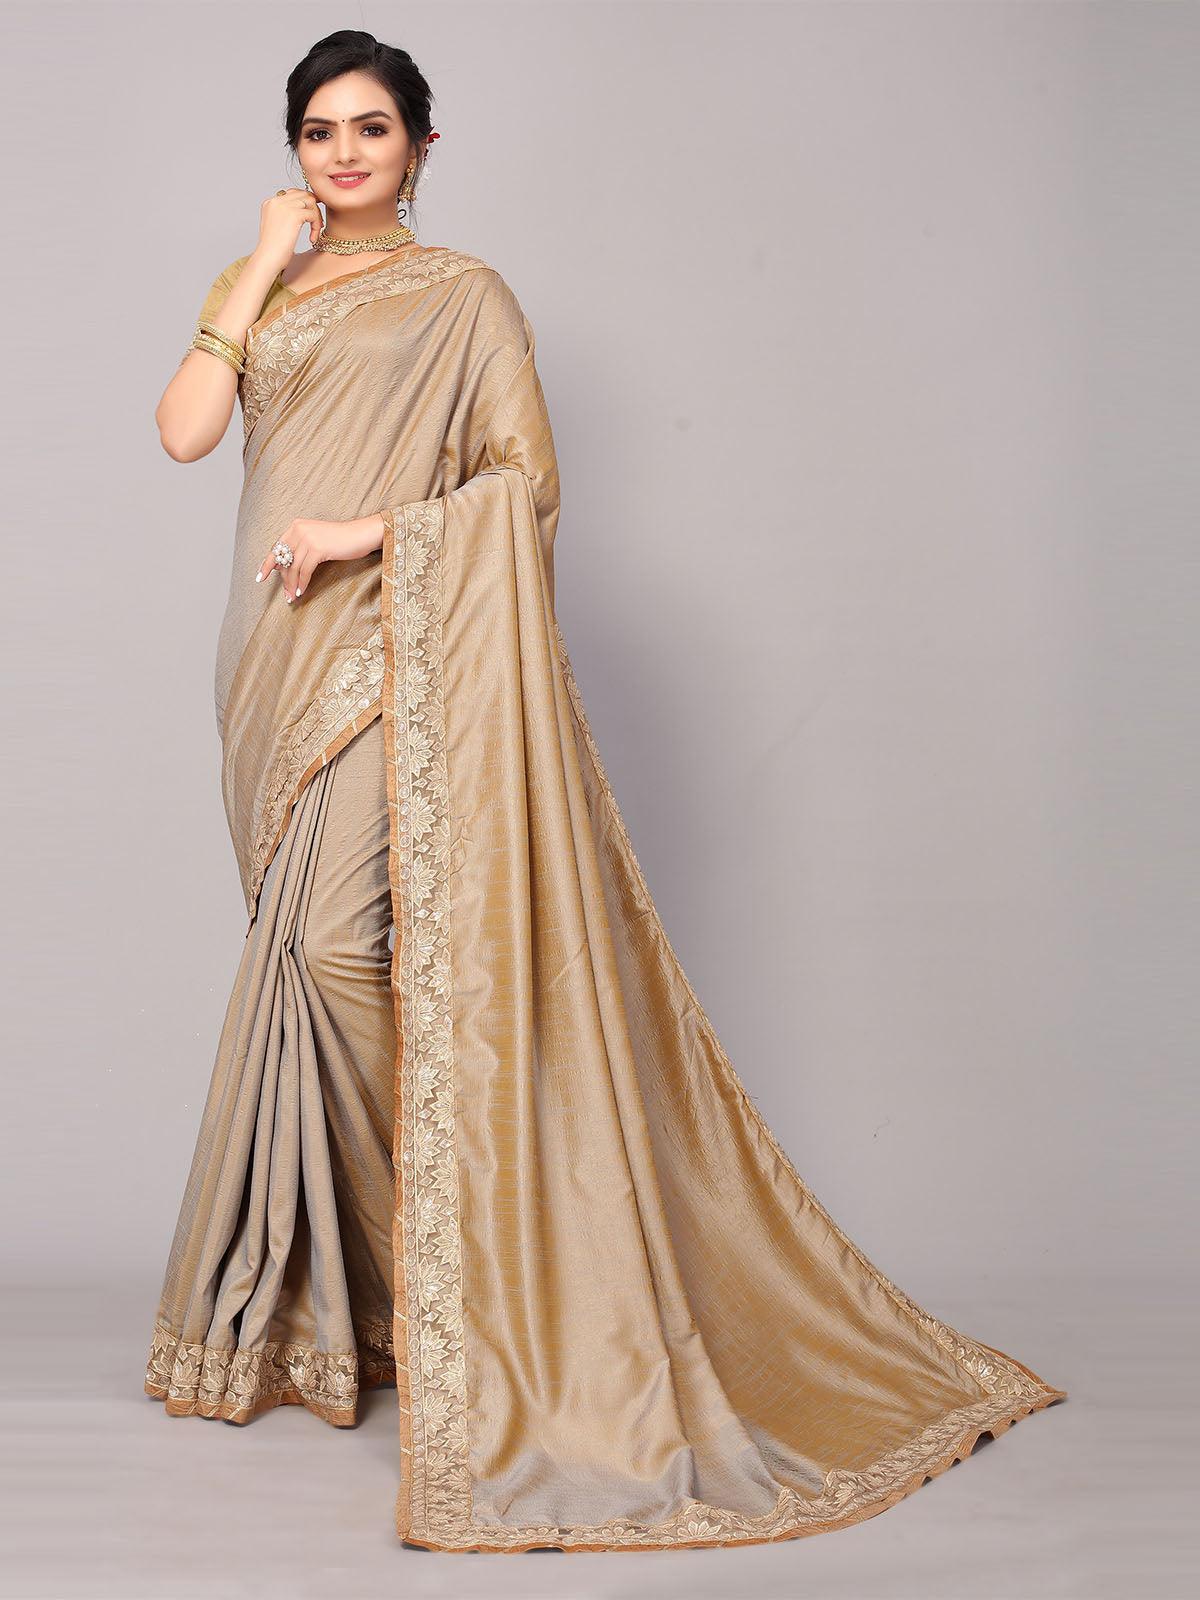 Women's Dusty Brown Satin Silk Embroidery Border Work Saree With Blouse. - Odette